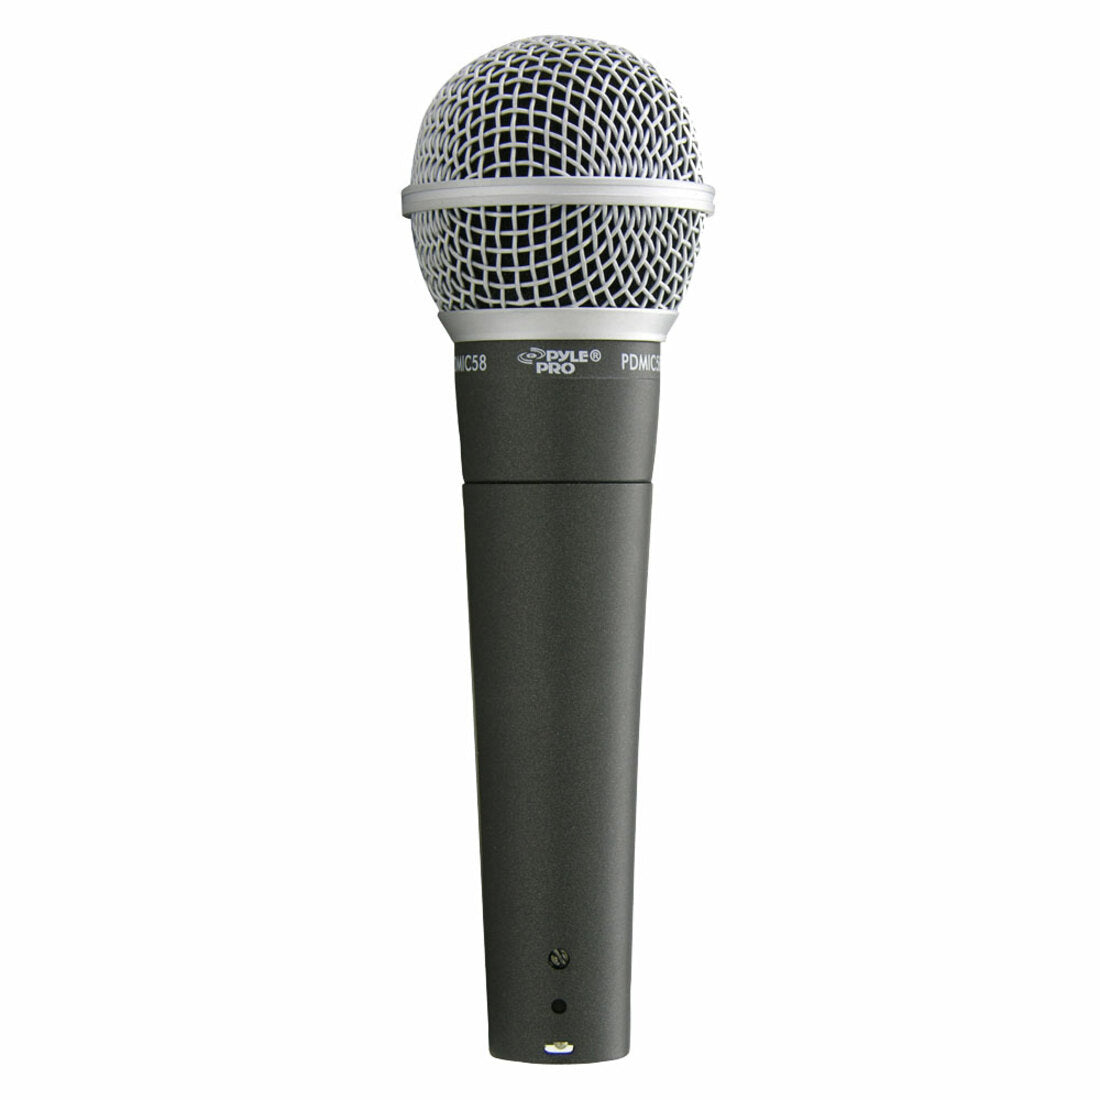 PylePro PDMIC58 Wired Dynamic Microphone, Handheld XLR Microphone - 1 Year Warranty